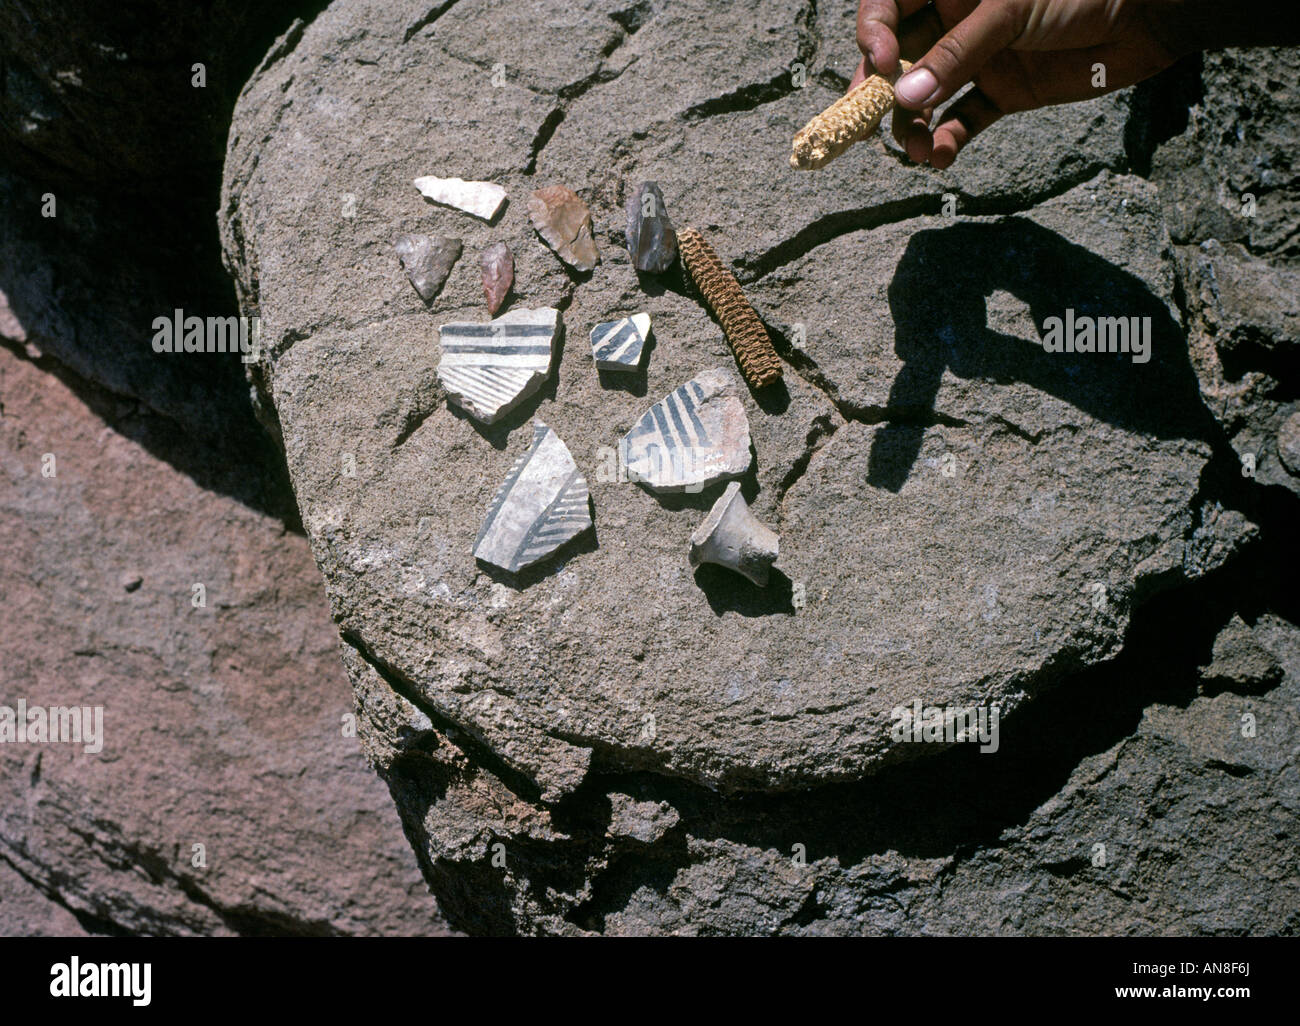 A collection of Anasazi arrowheads pottery and corn cobs found by white water rafters floating the inner gorge of Cataract Canyo Stock Photo